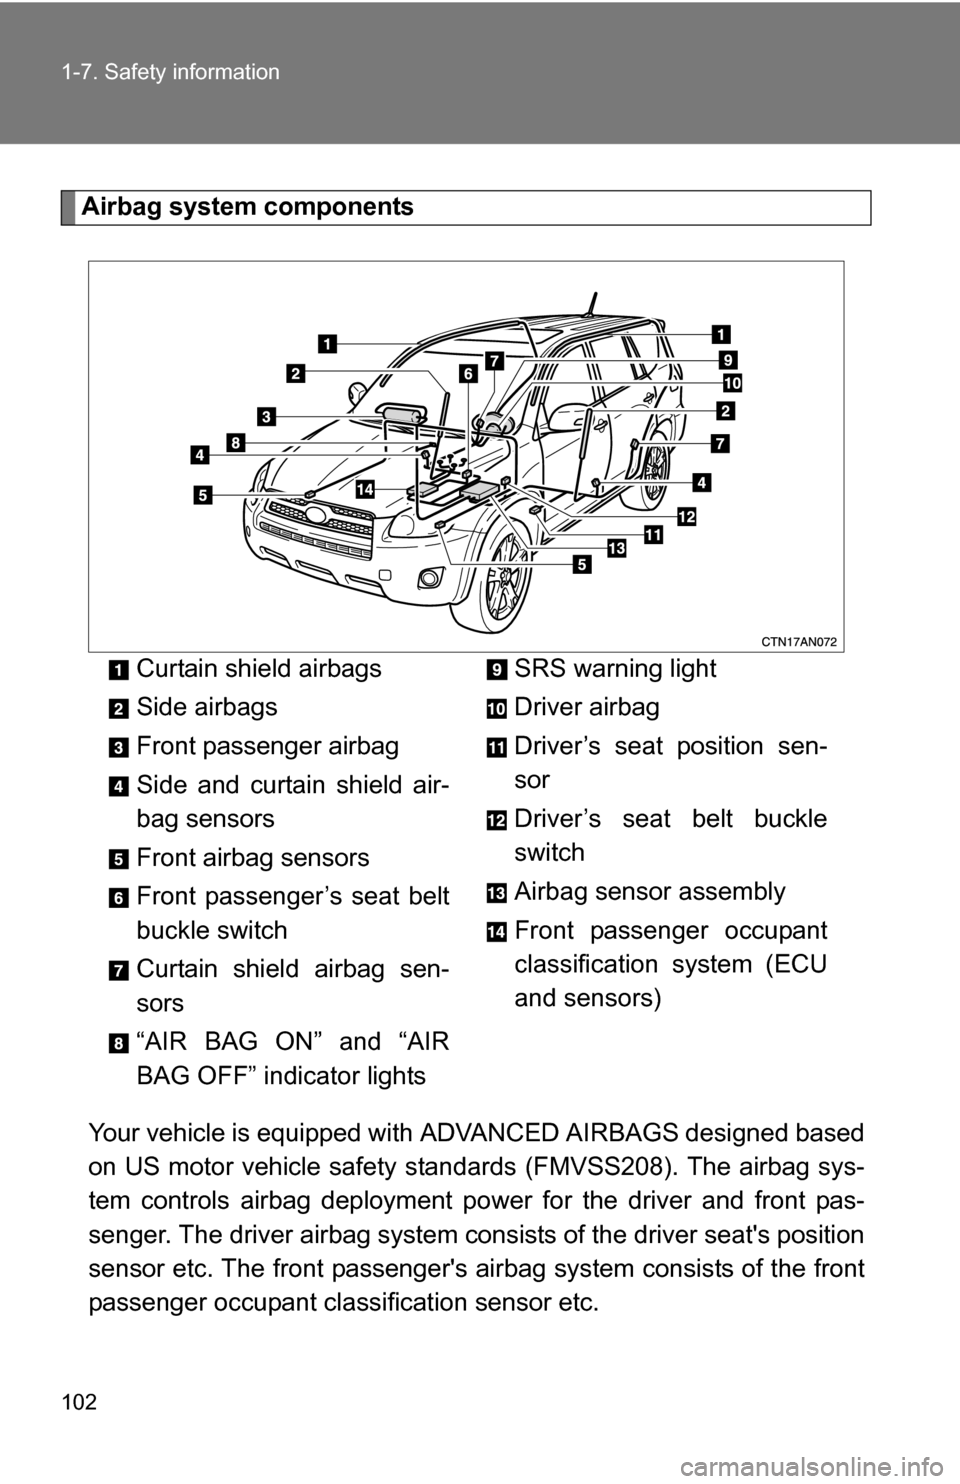 TOYOTA RAV4 2012 XA30 / 3.G User Guide 102 1-7. Safety information
Airbag system componentsYour vehicle is equipped with  ADVANCED AIRBAGS designed based
on US motor vehicle safety standards (FMVSS208). The airbag sys-
tem controls airbag 